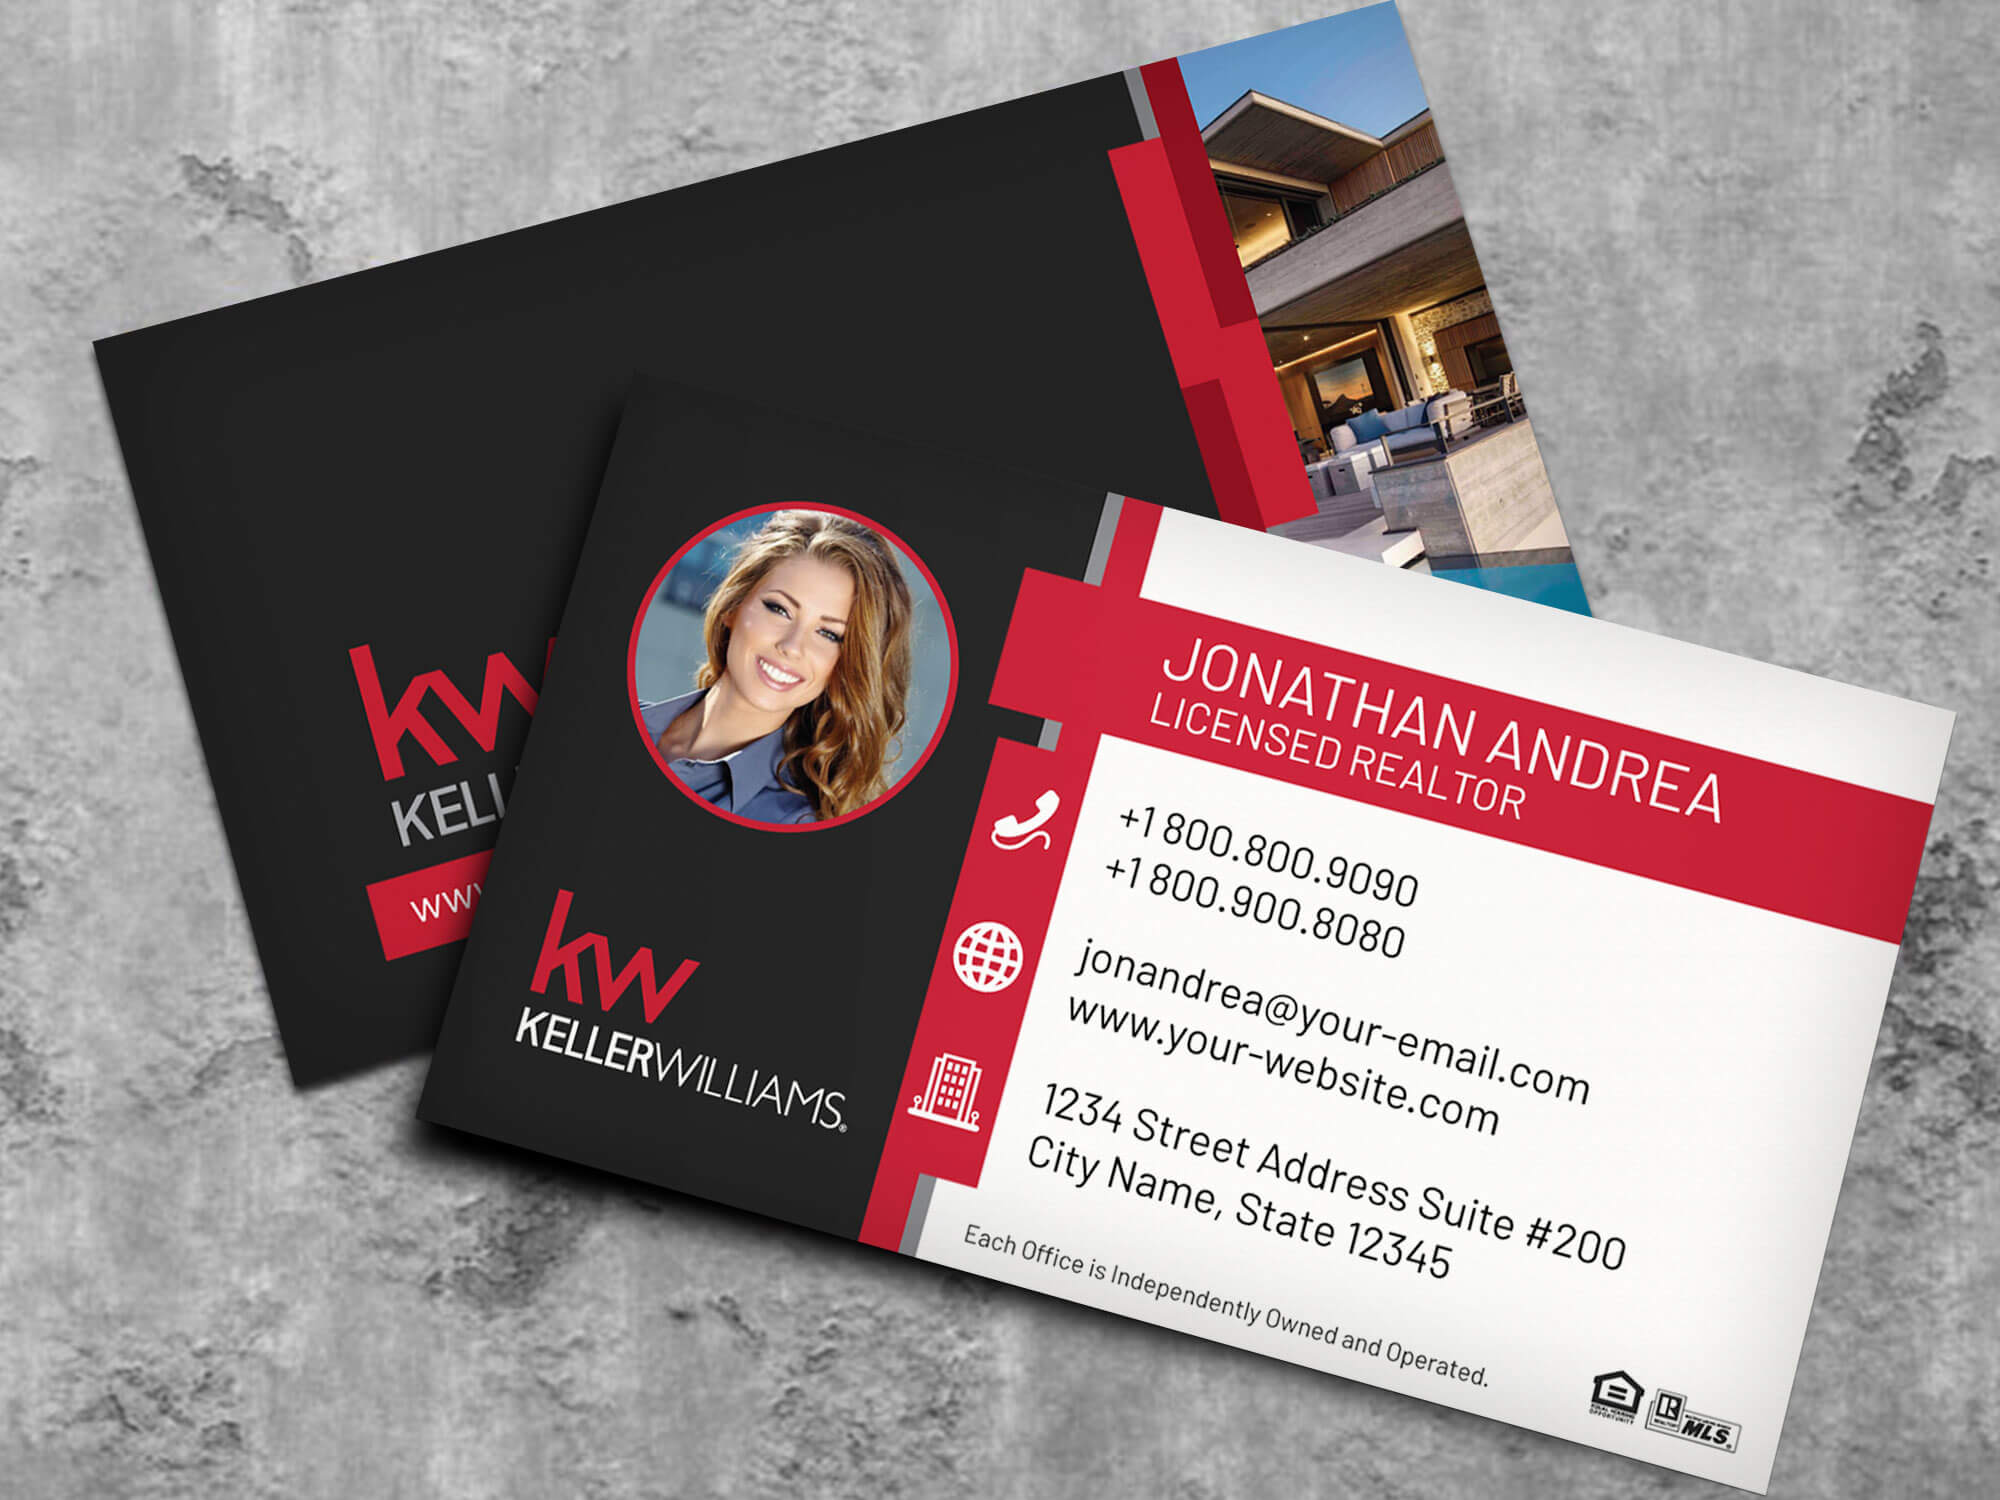 Keller Williams Business Card Template Bc19702Kw – Nusacreative With Regard To Keller Williams Business Card Templates